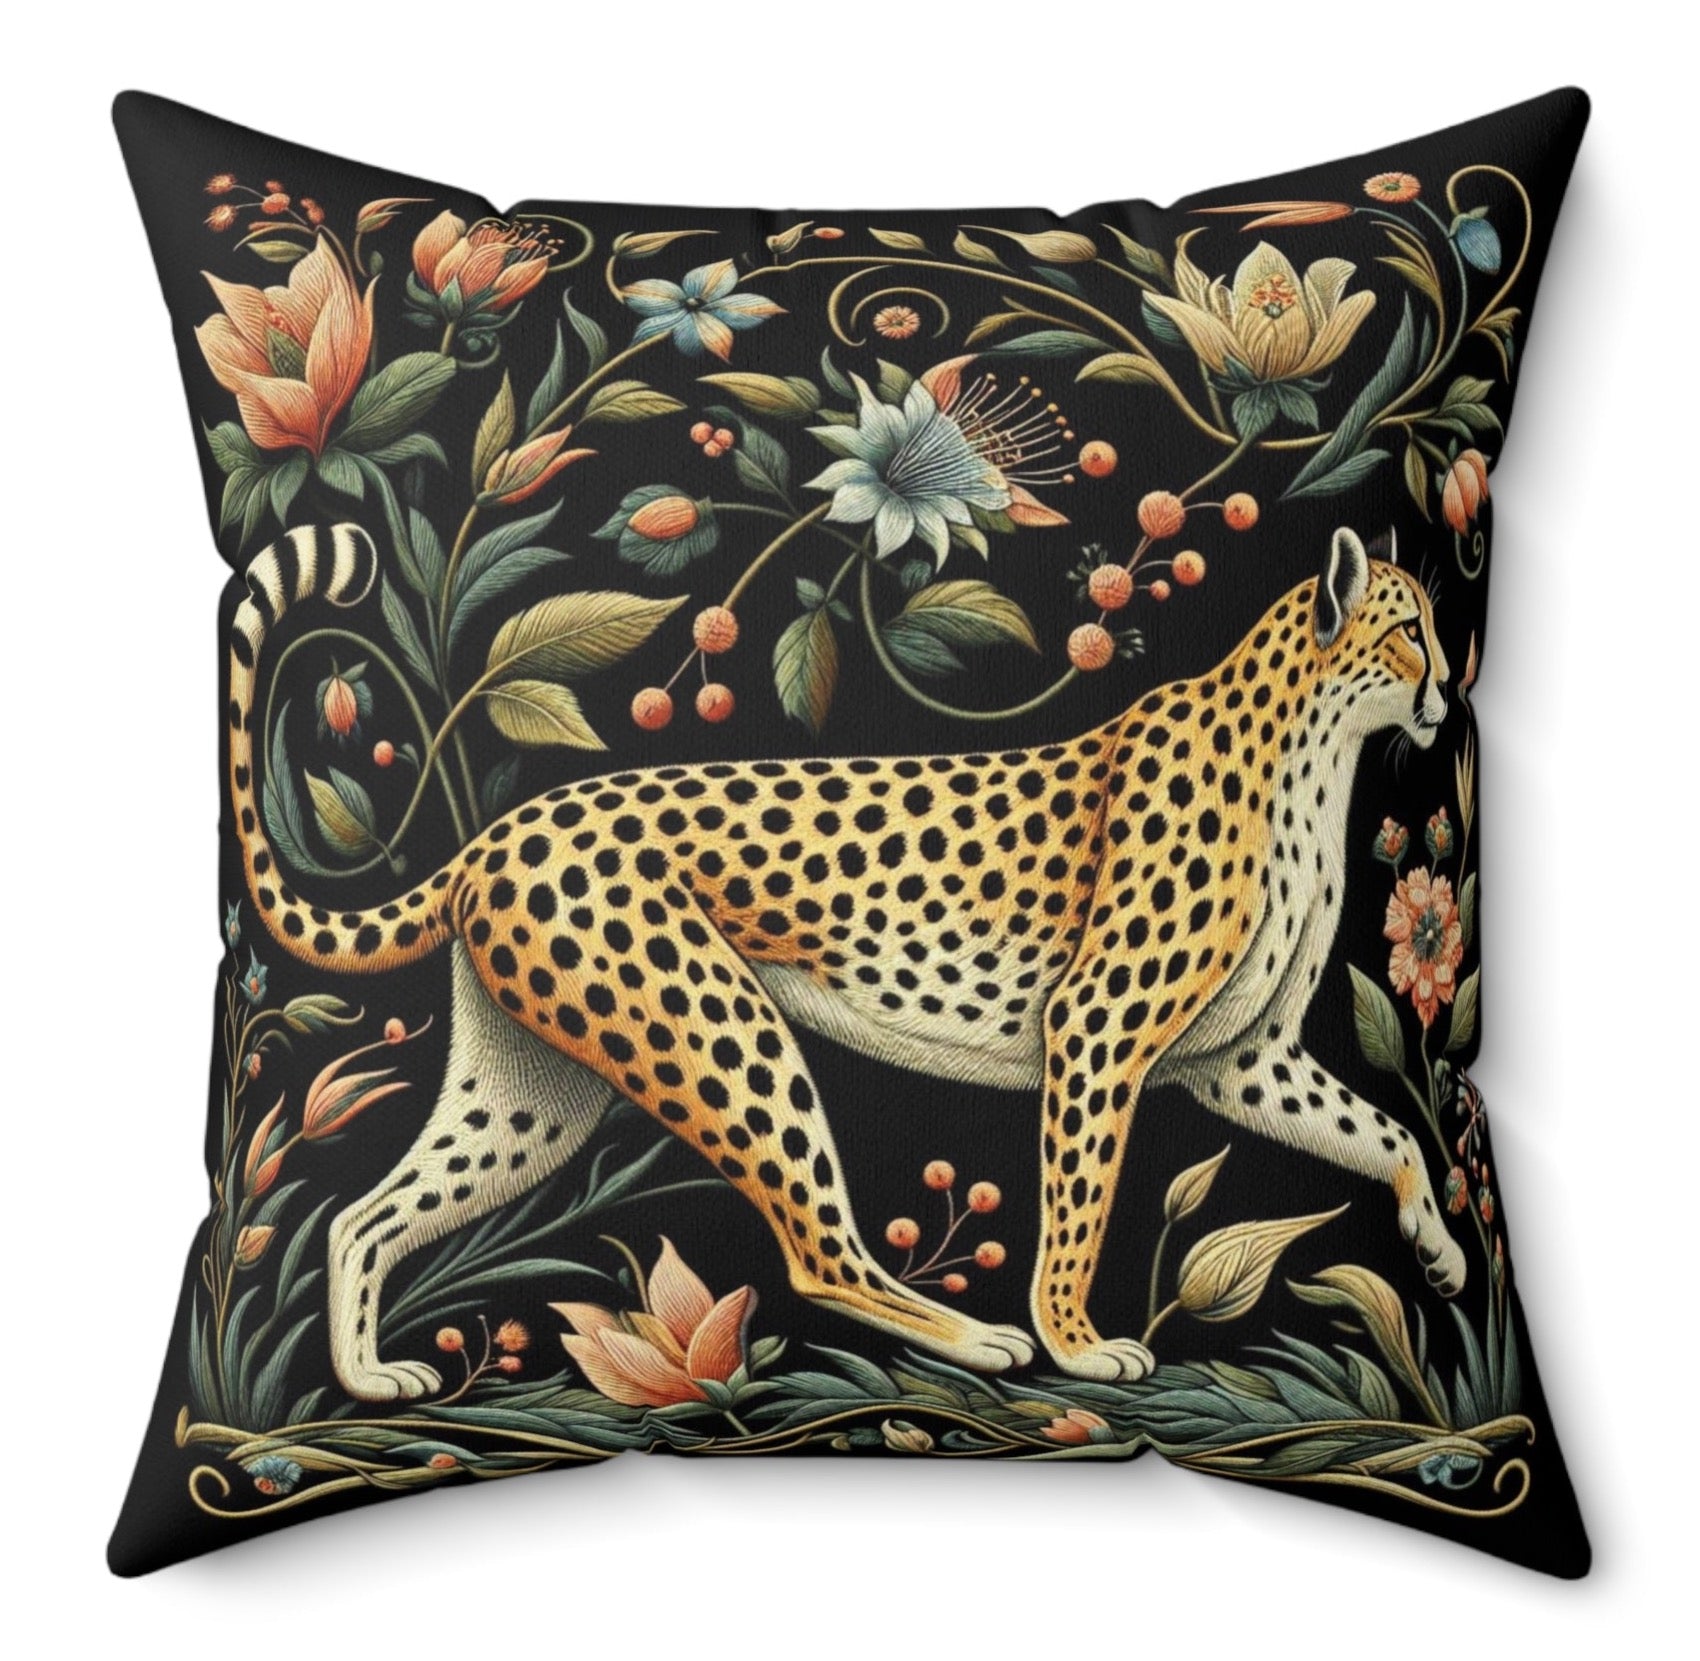 Eclectic Vintage Botanical Floral Cheetah Maximalist Throw Pillow Polyester Decorative Cushion Square Cover